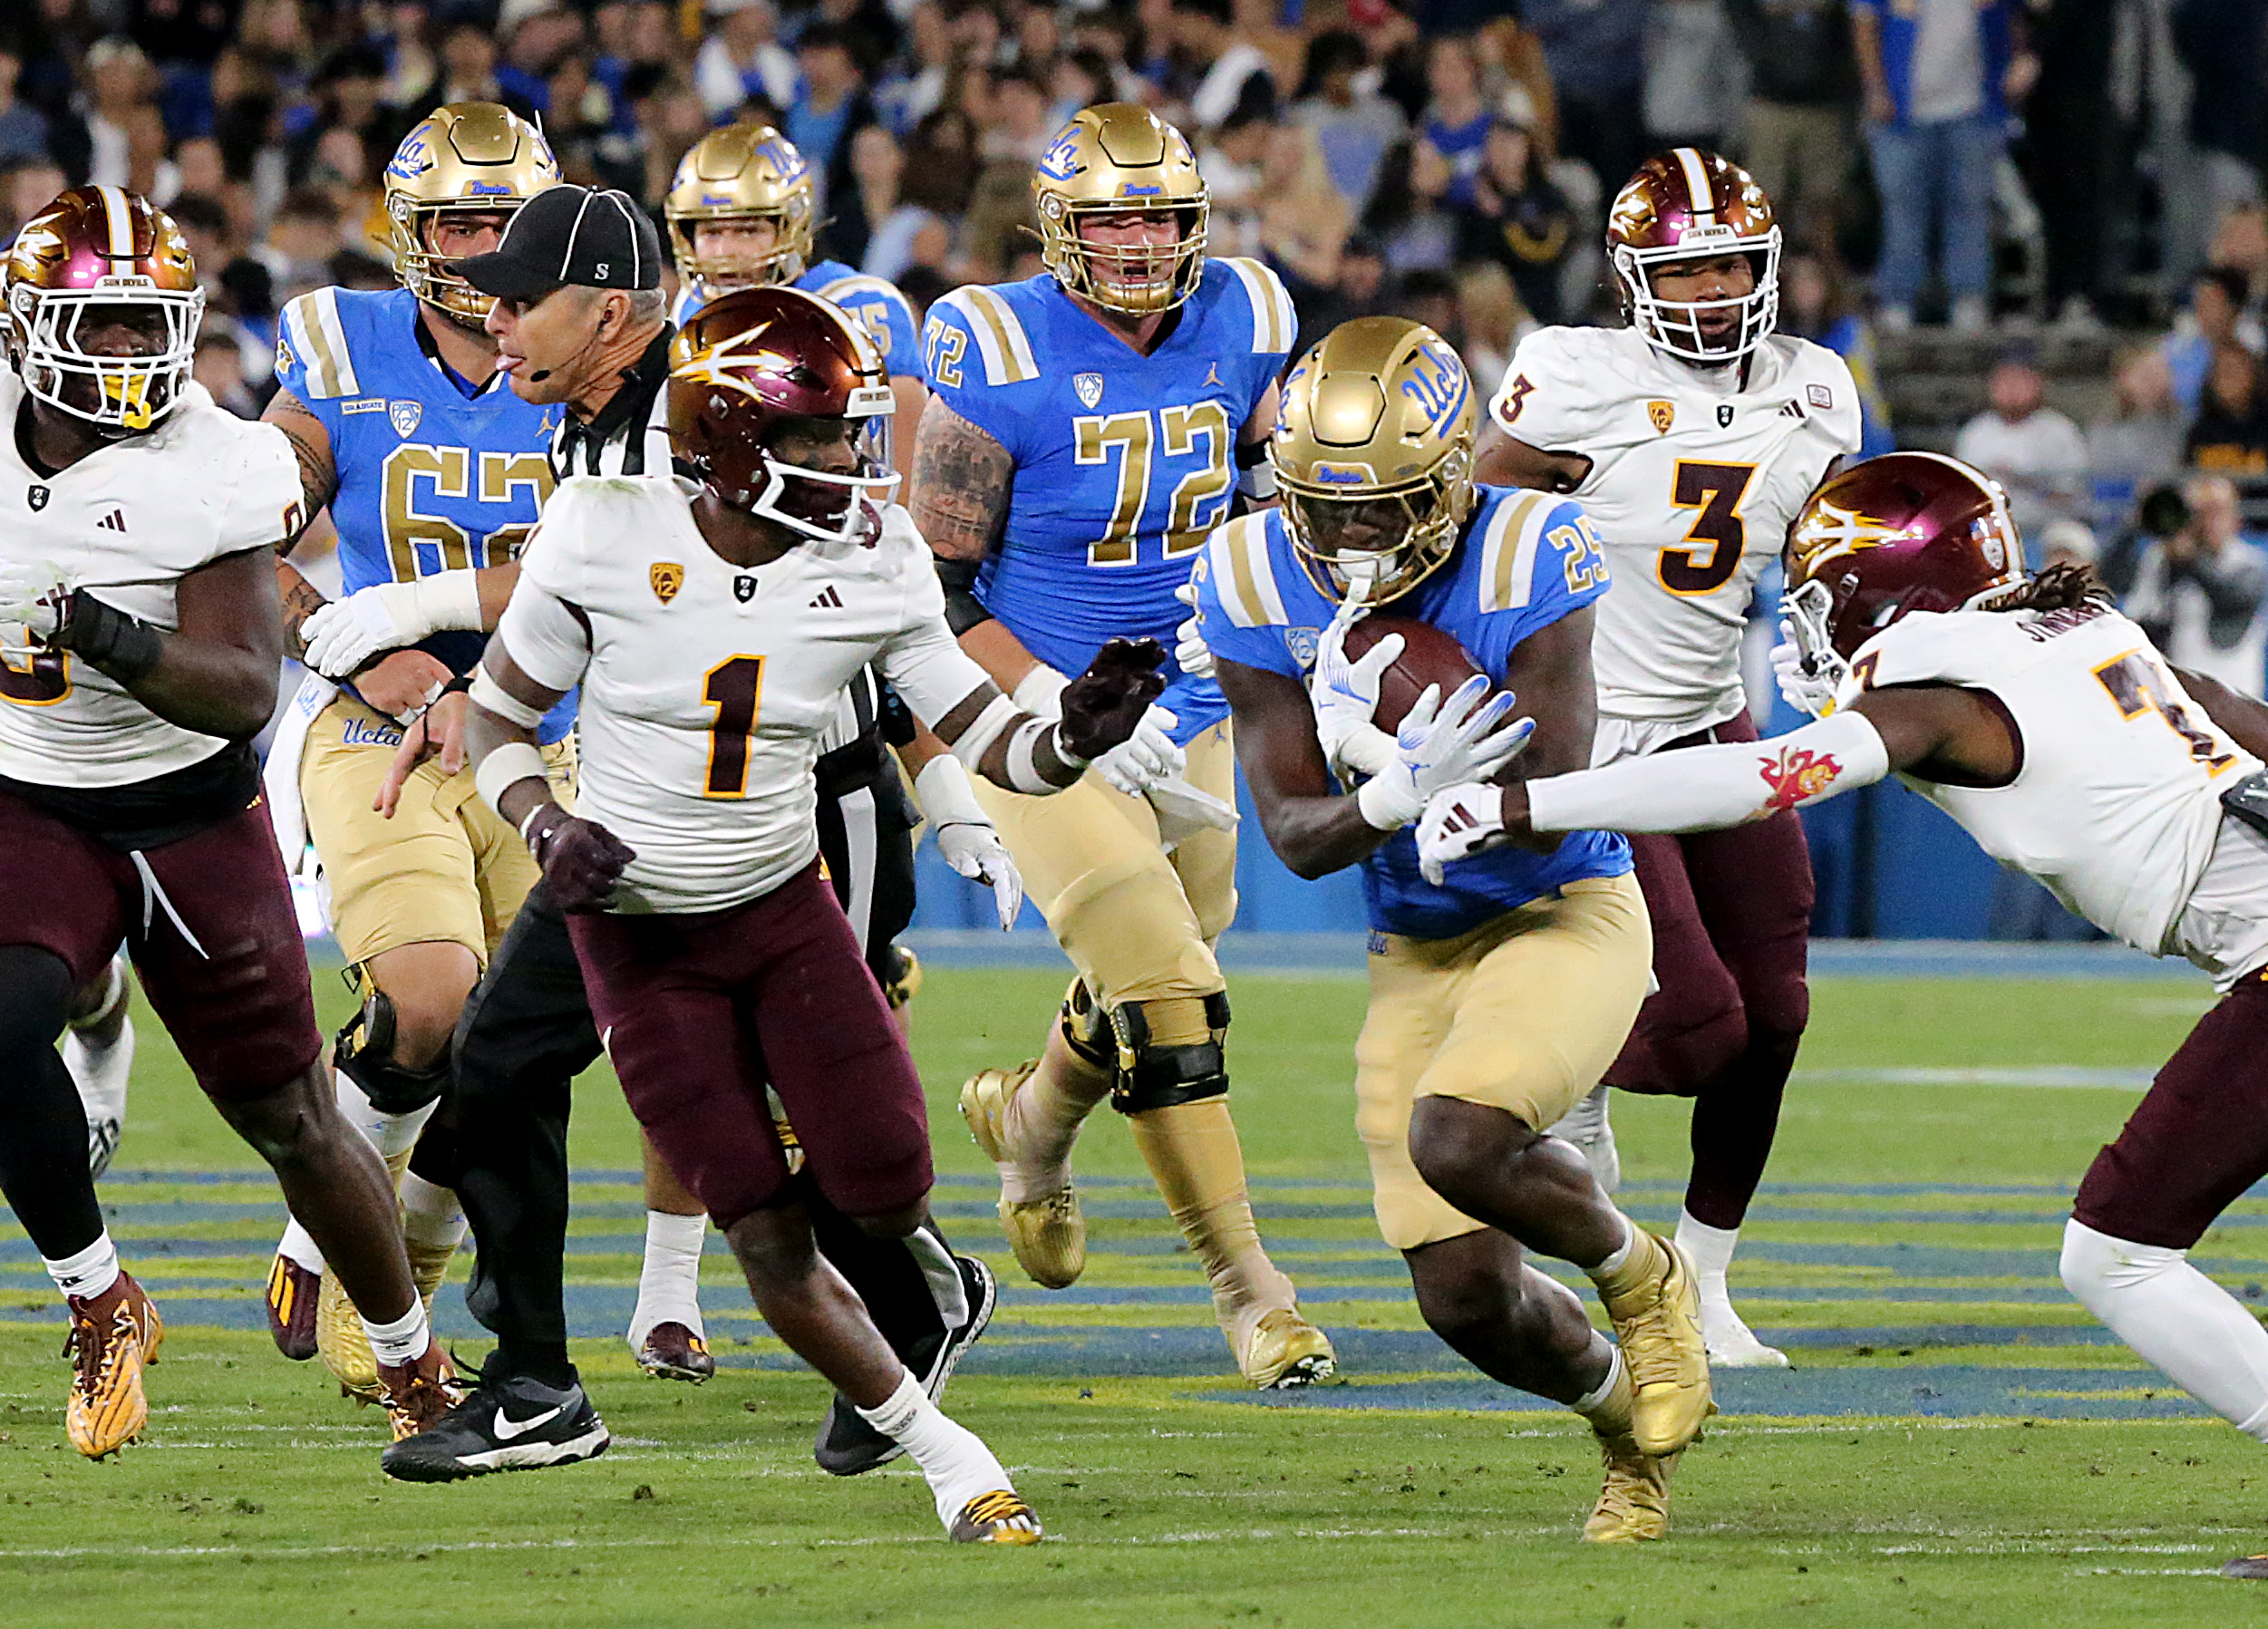 UCLA Bruins play the Arizona State Sun Devils in a Pac-12 Conference football game at the Rose Bowl in Pasadena on Saturday night, Nov. 11, 2023.